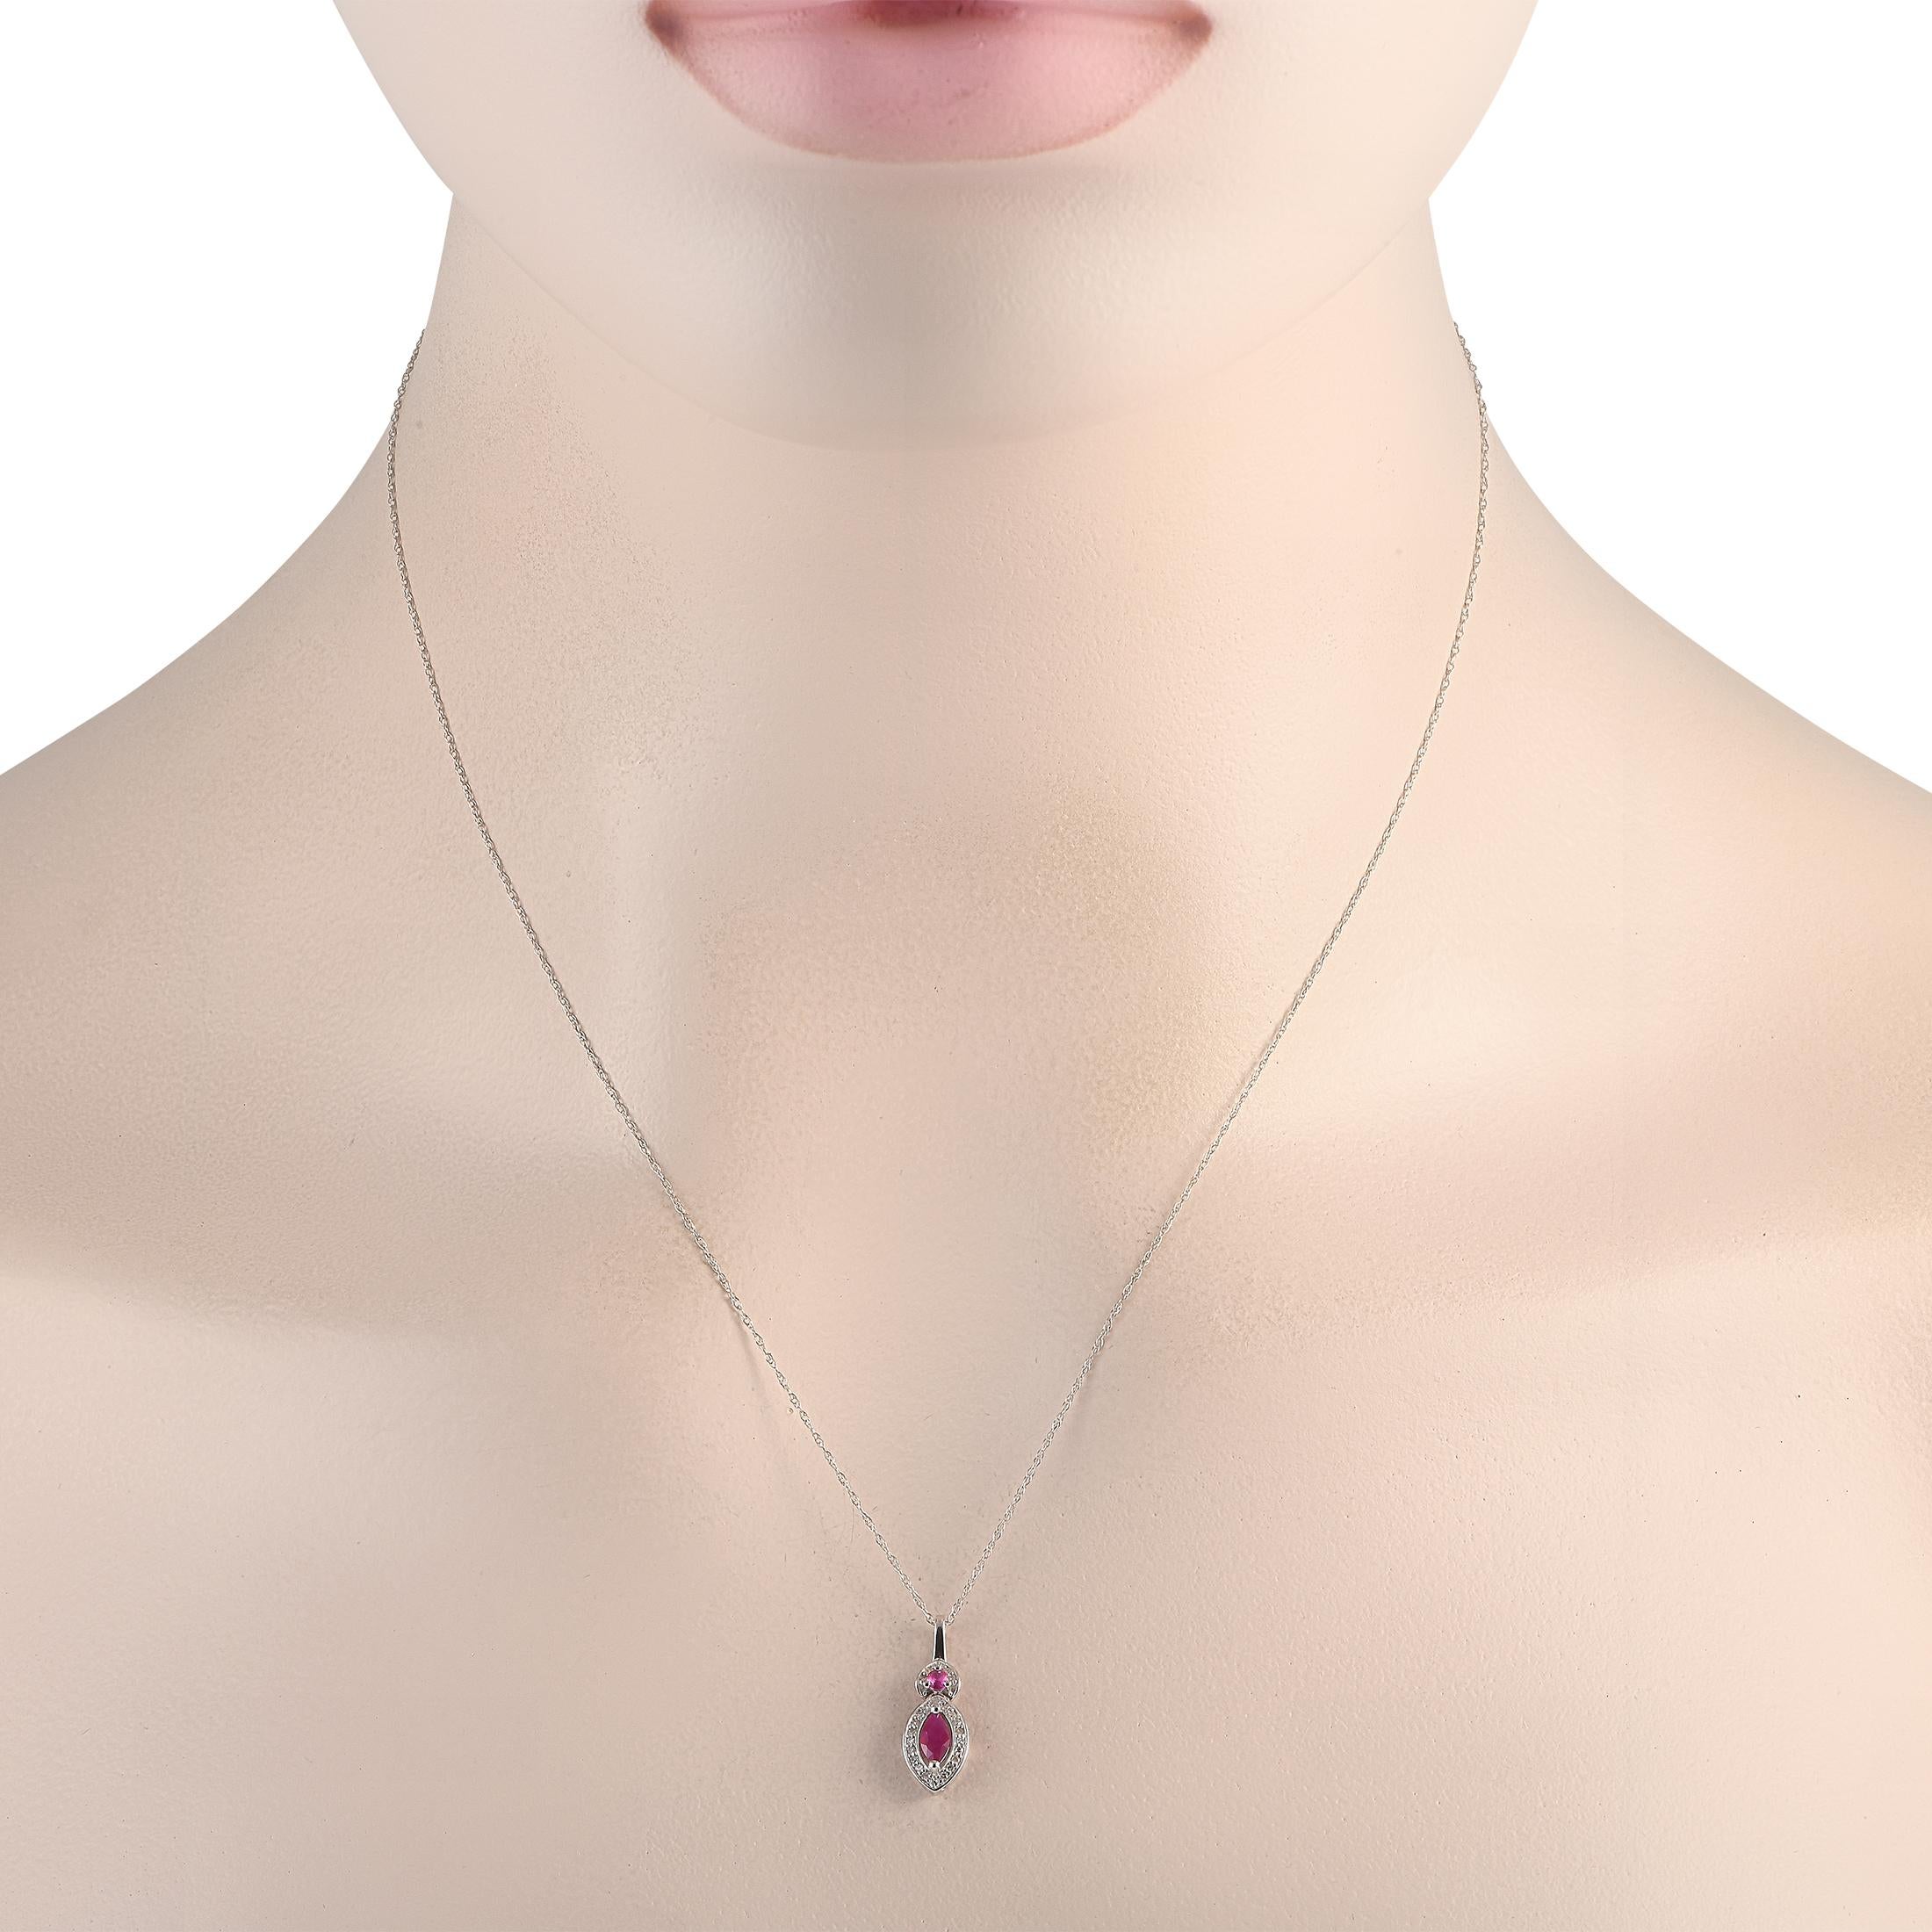 An eye-catching diamond and ruby necklace perfect as a gift for a July-born. This LB Exclusive piece is crafted in 14K white gold. It has a polished bail holding a petite circular frame with diamonds on the edges and a round ruby at the center.